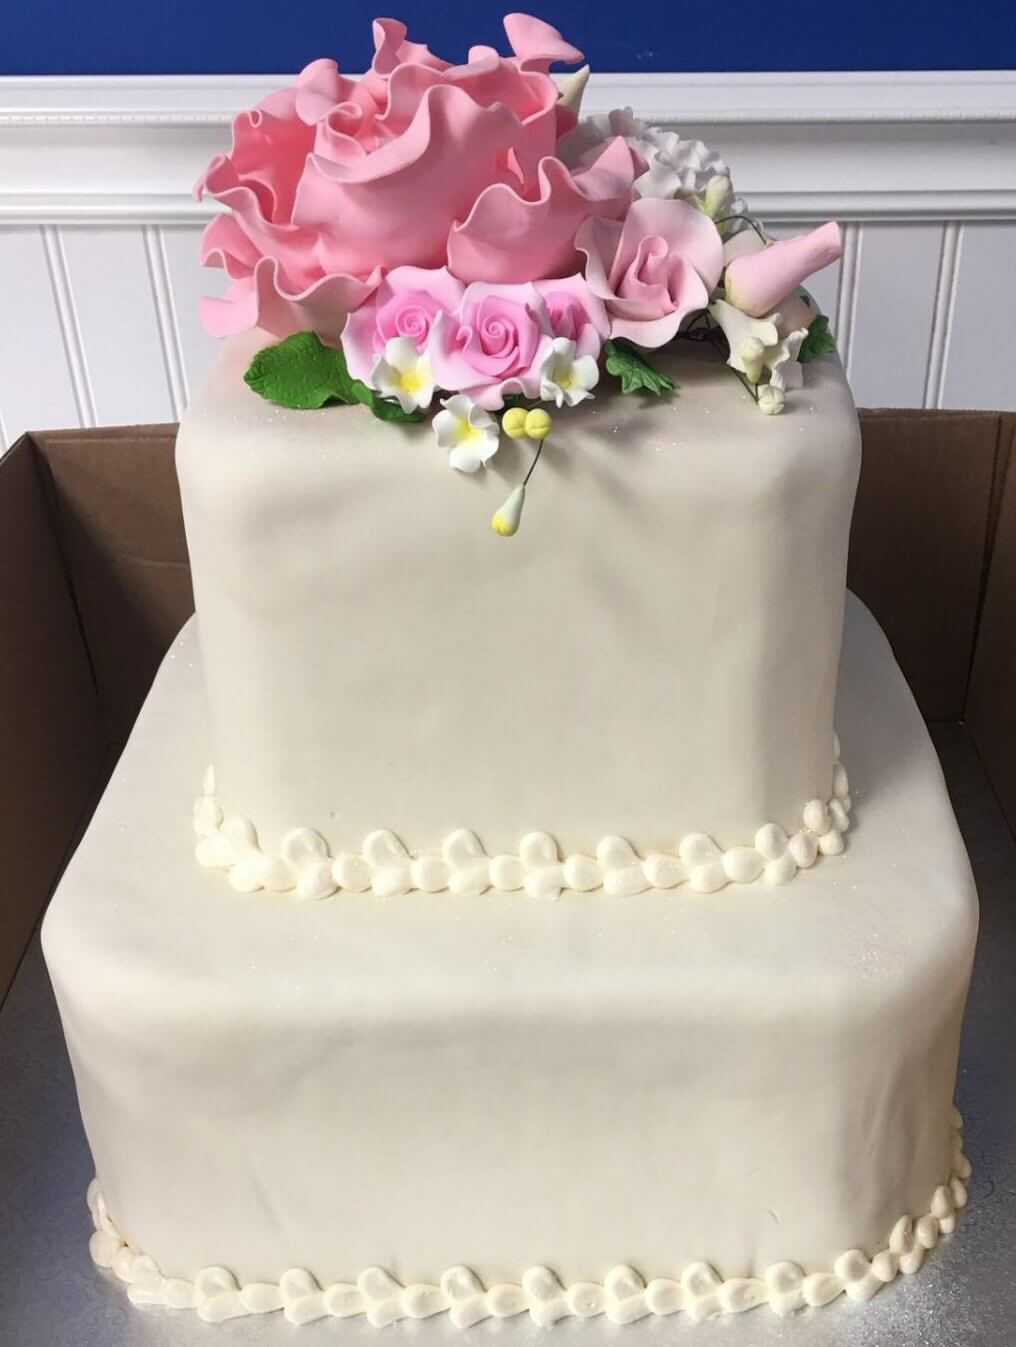 2-tiered cake with pink and white flowers